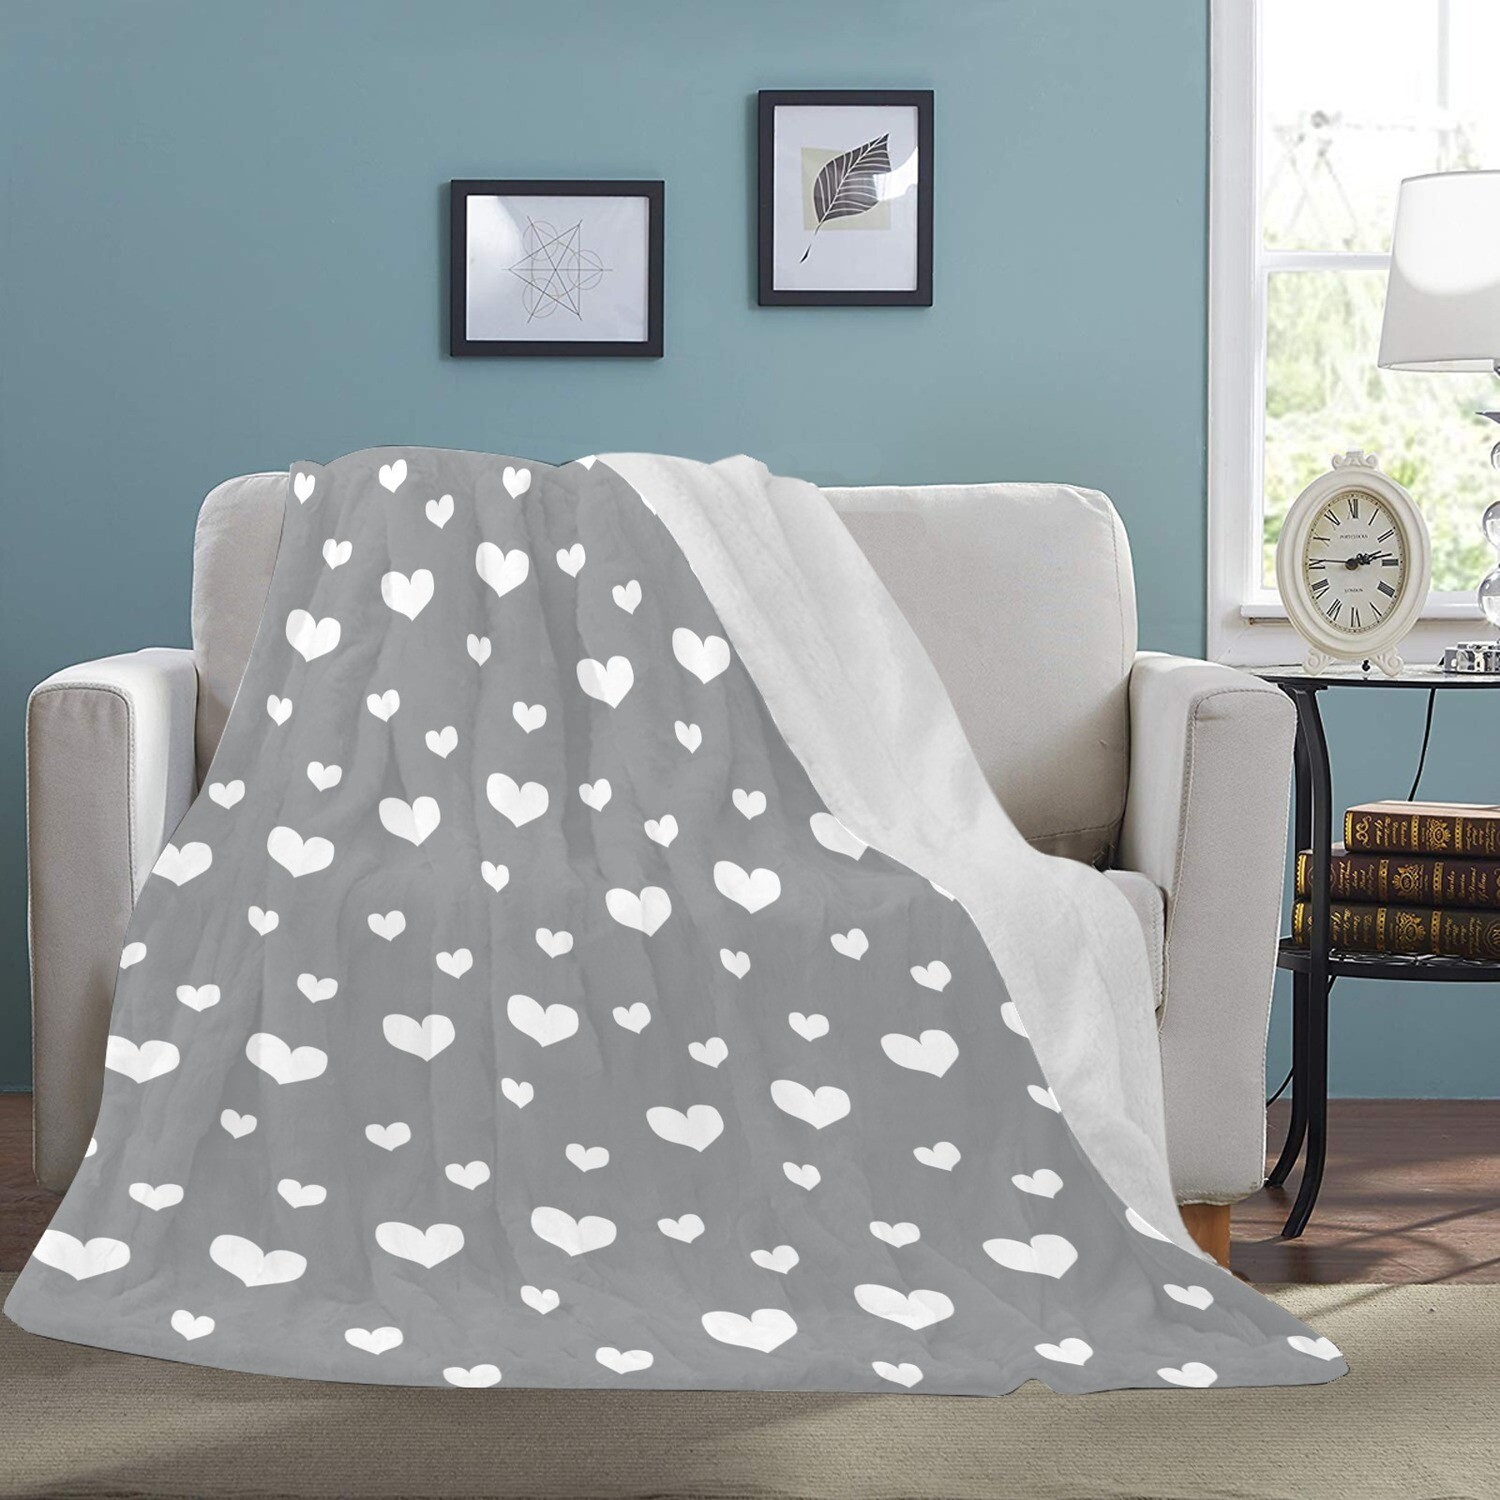 🤴🏽👸🏽💕Large Ultra-Soft Micro Fleece Blanket Valentine white hearts on ultimate gray, gift, gift for her, gift for him, gift for them, 70"x80"